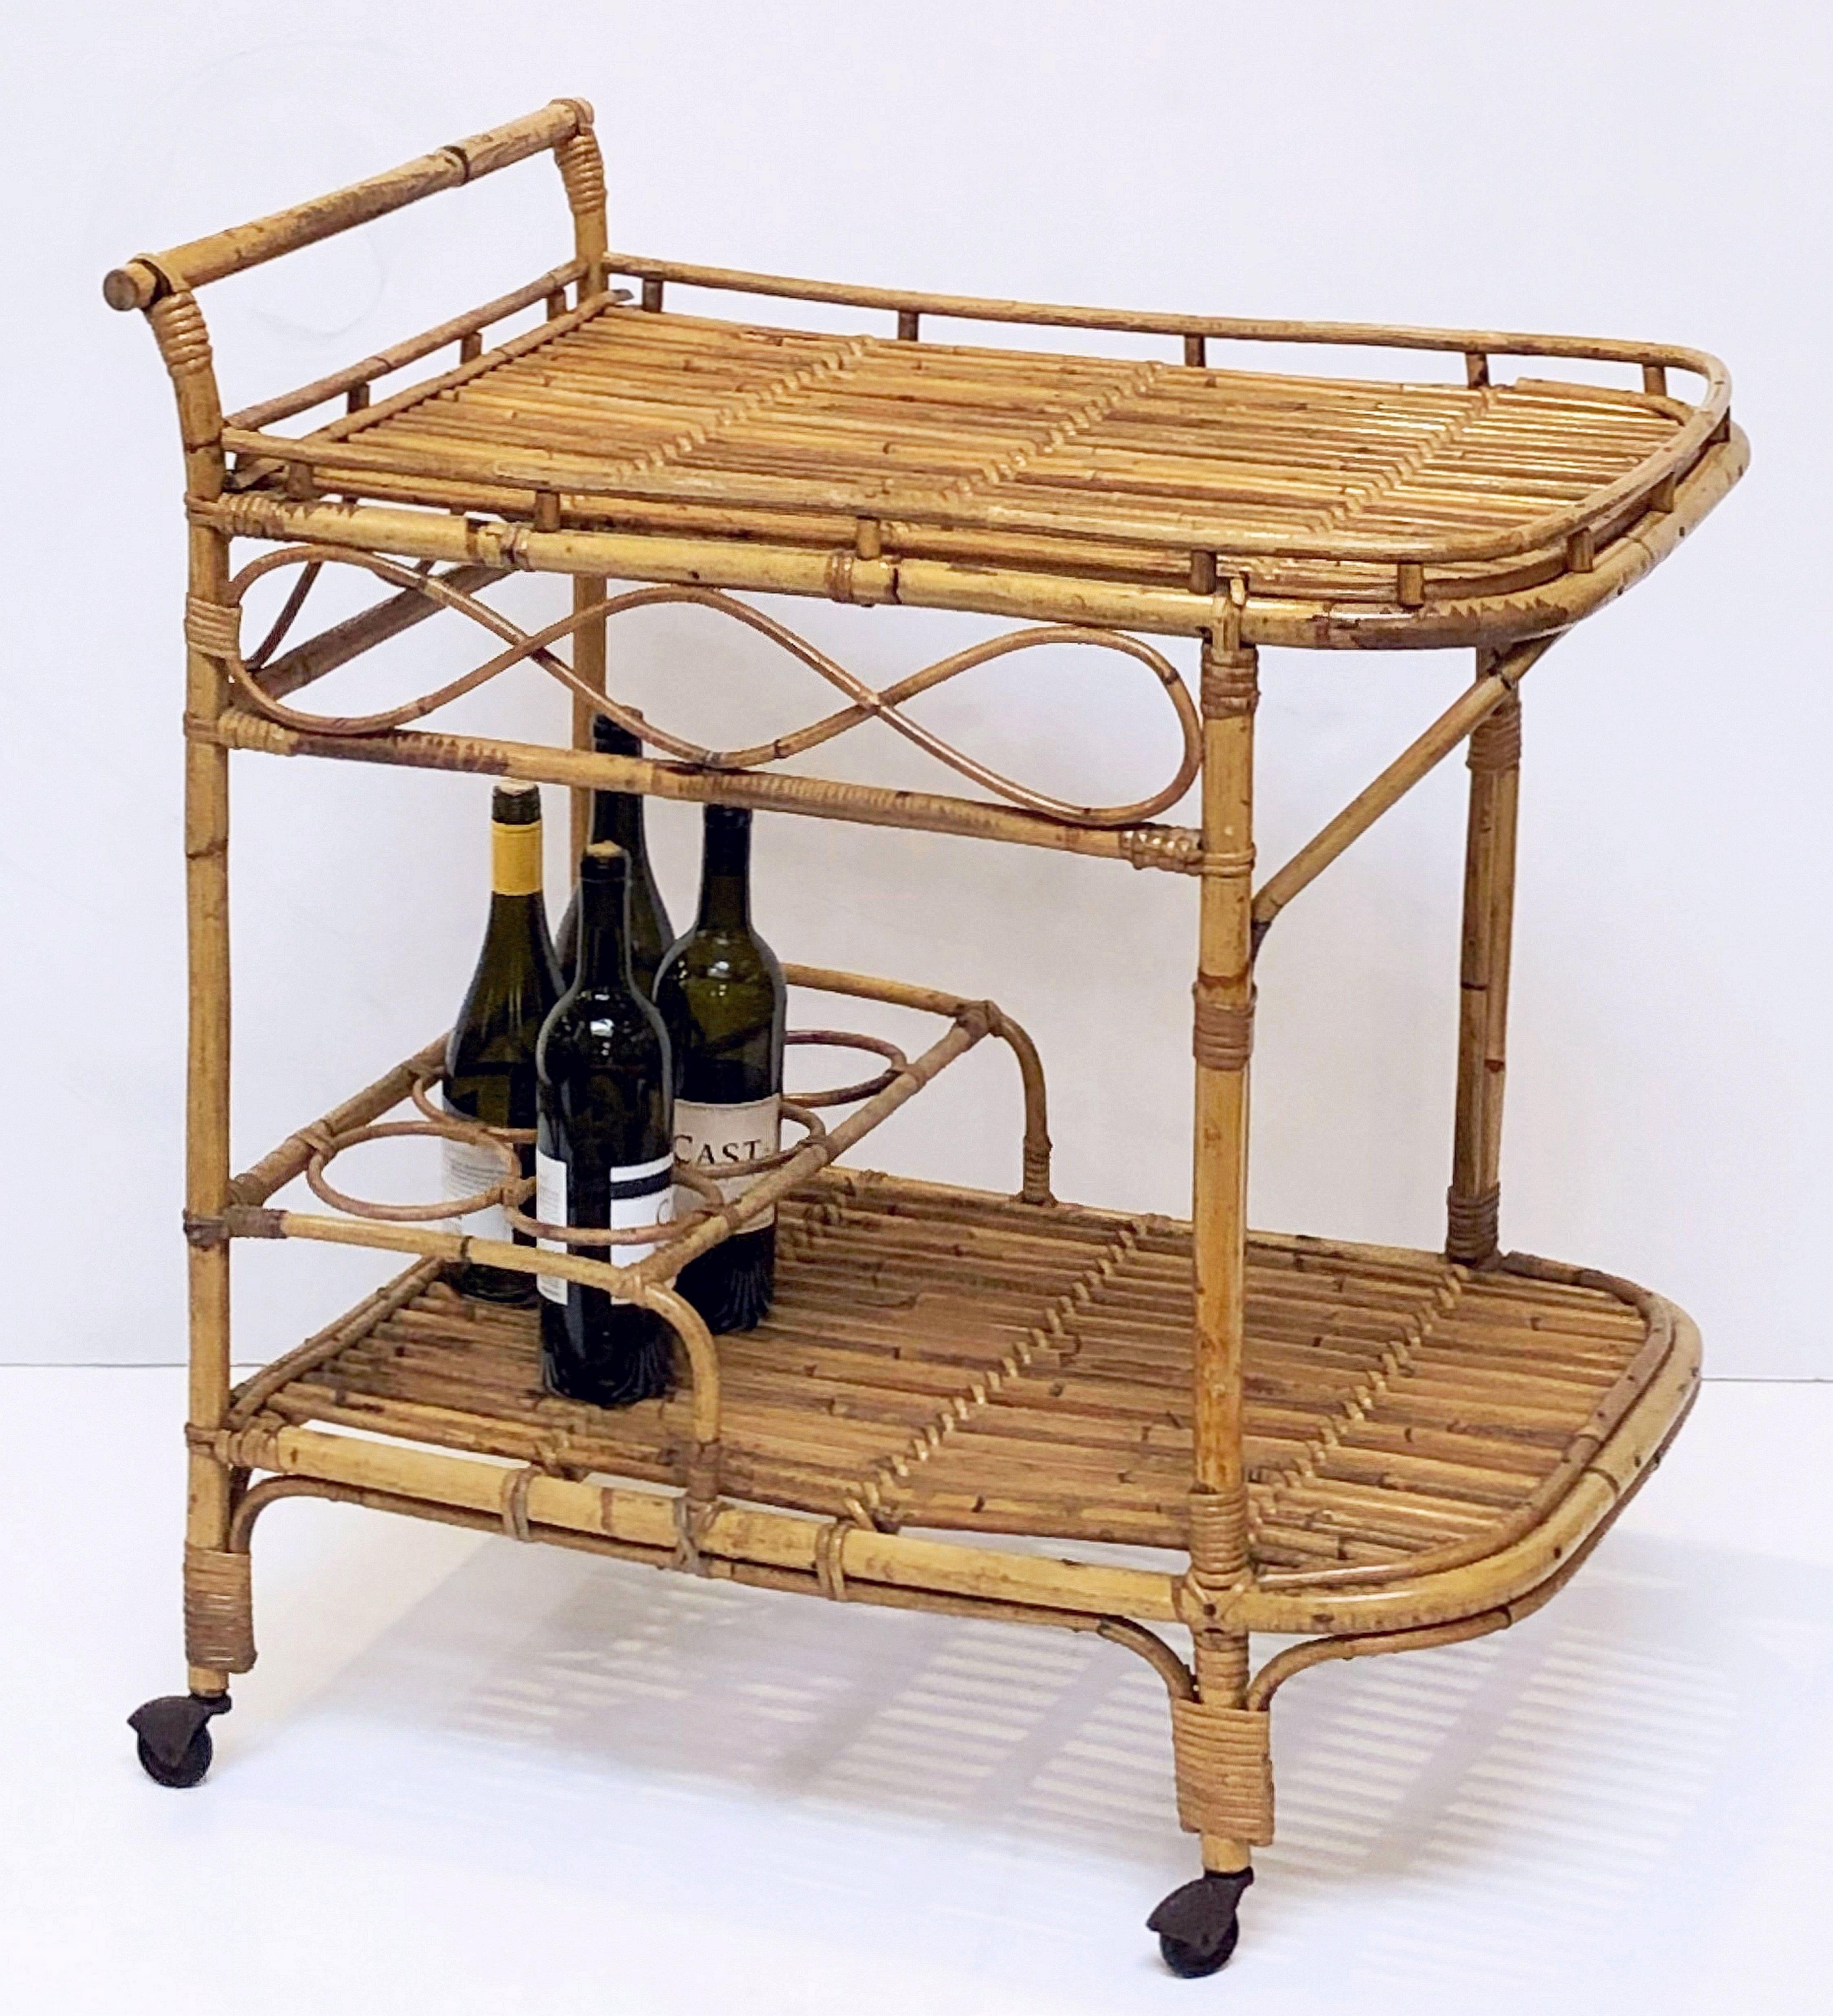 A fine Italian handcrafted mid-century rattan and bamboo bar cart or drinks trolley. Featuring a two-tiered body with decorative accents - the top tier with a gallery and handle over a bottom tier with fittings for six bottles.

Great for a patio or